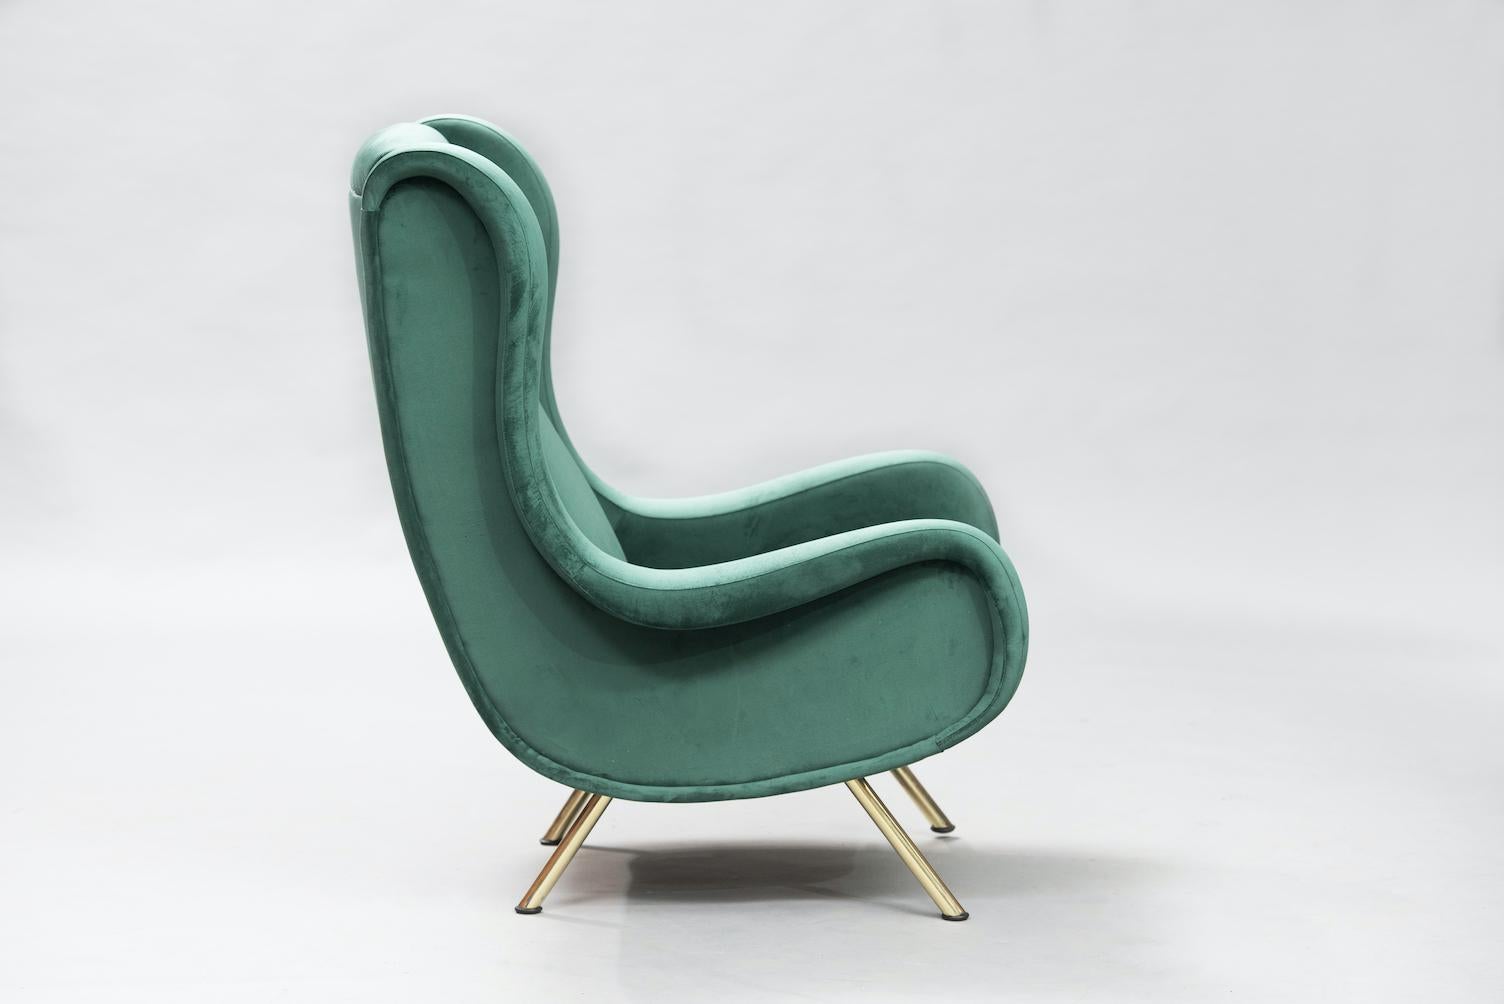 Senior armchair by Marco Zanuso for Arflex early edition, fully restored and reupholstered in a green velvet, marked with the Arflex label.

